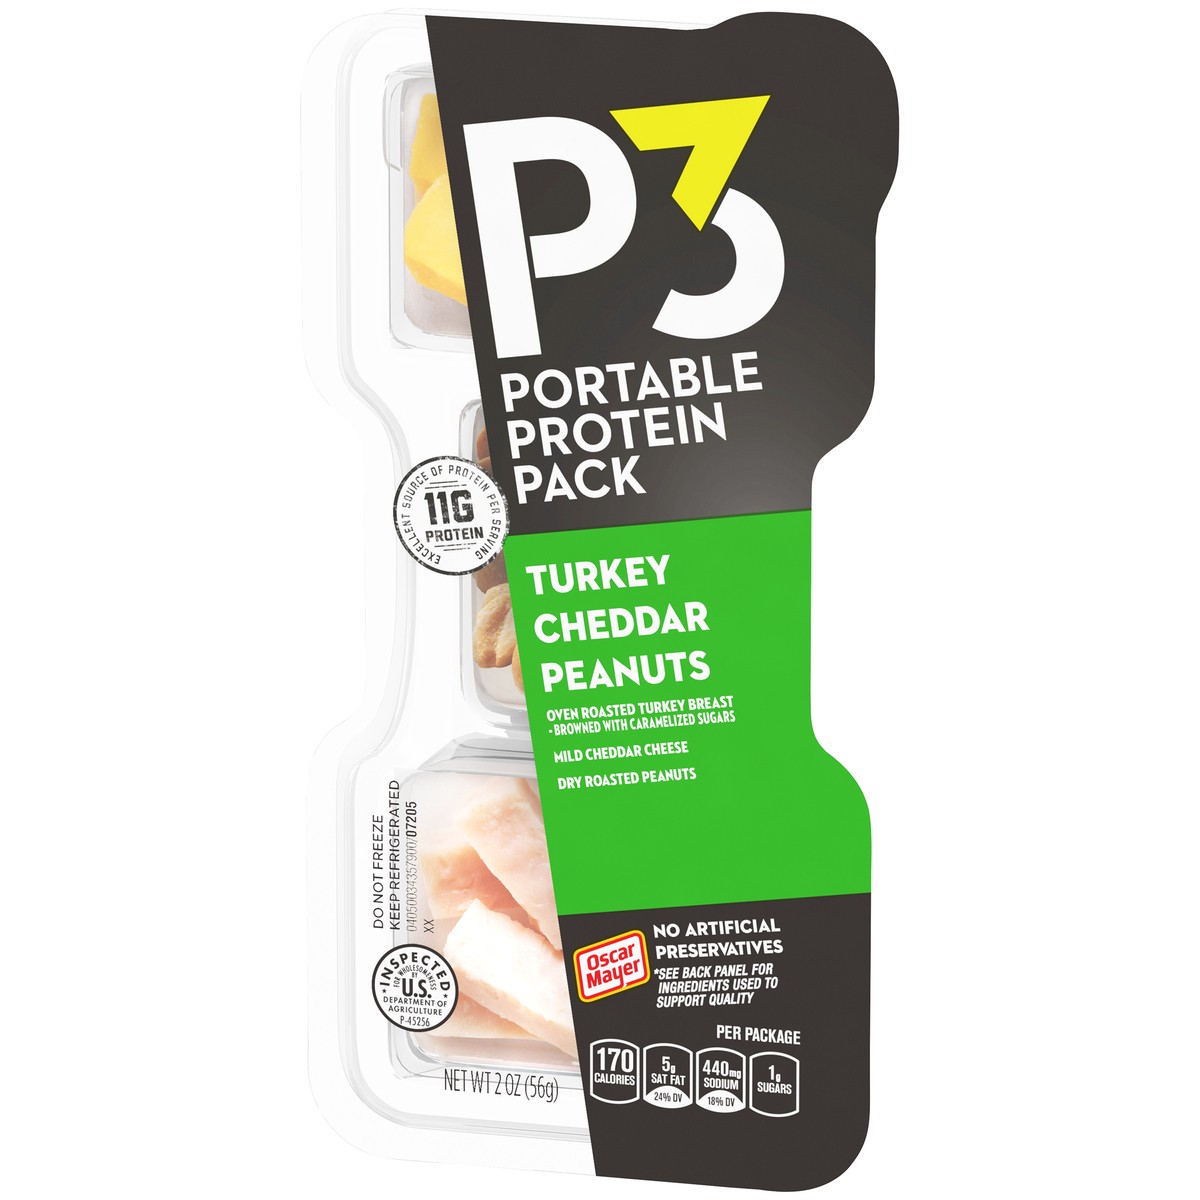 slide 5 of 9, P3 Portable Protein Snack Pack with Turkey, Peanuts & Cheddar Cheese, 2 oz Tray, 2 oz